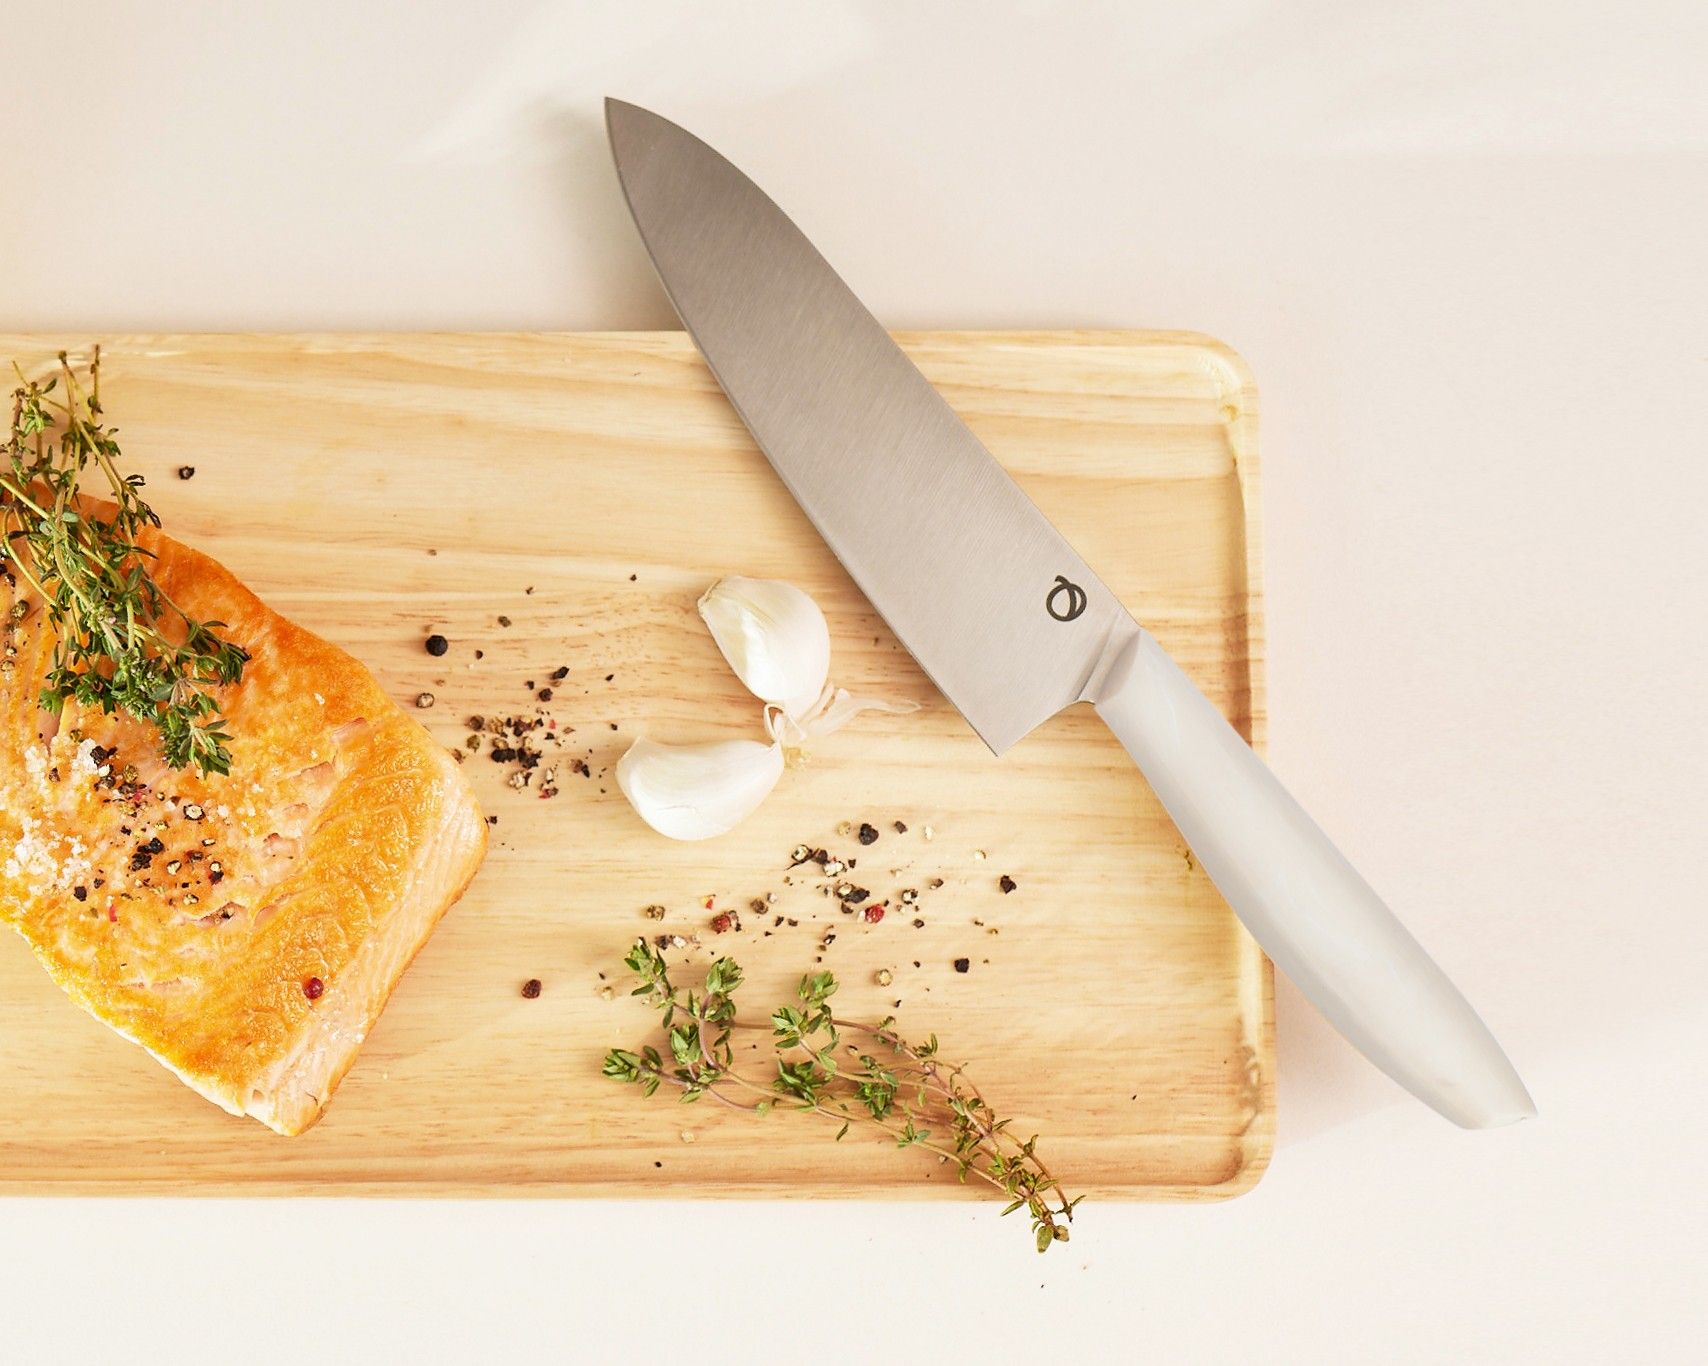 Olavson chef knife from above on cutting board